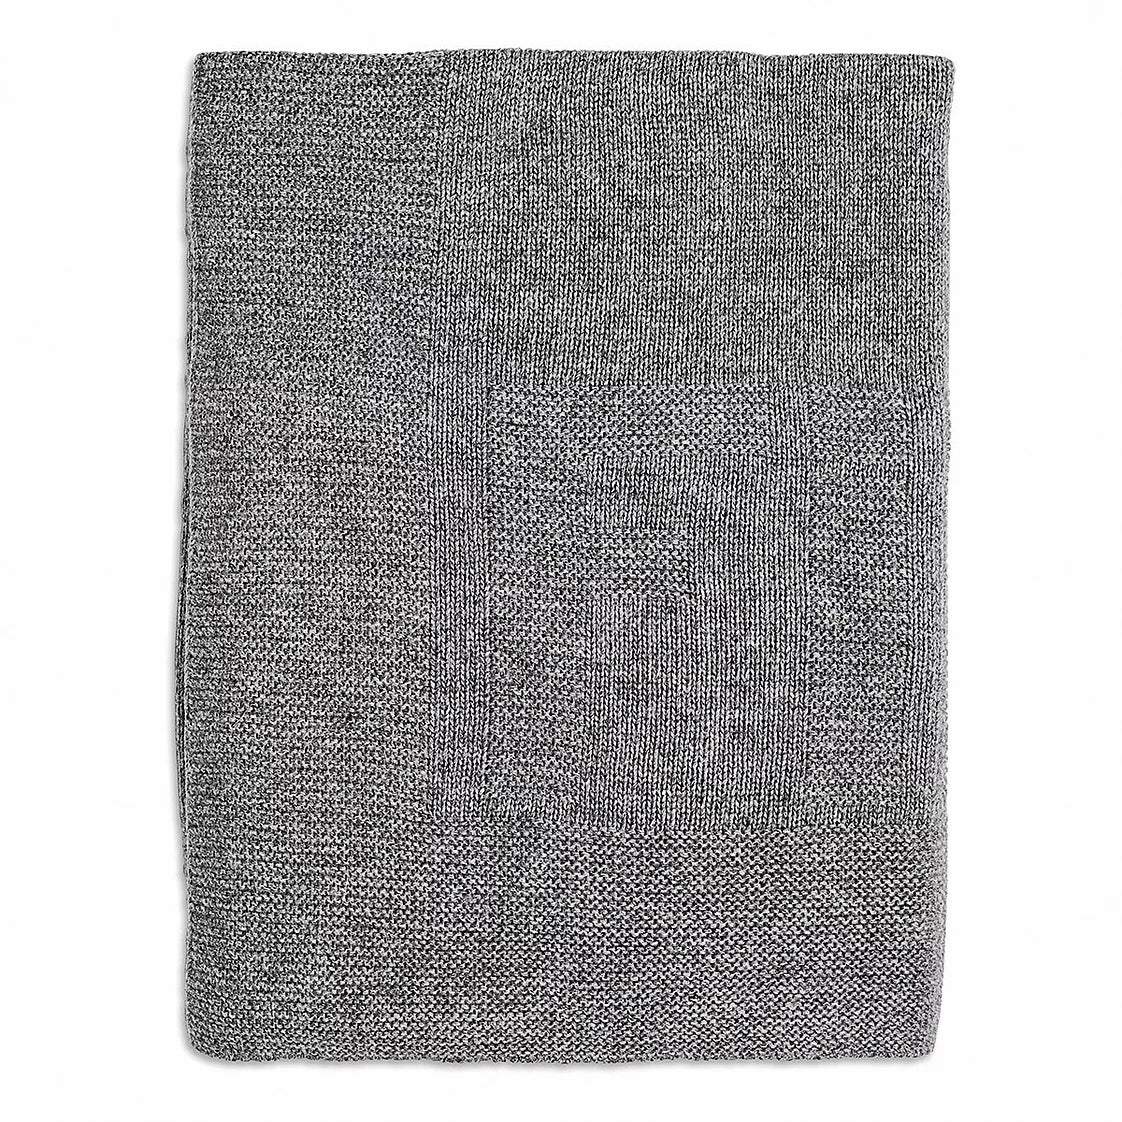 First Endless Grey Knitted Blanket in Wool & Cashmere